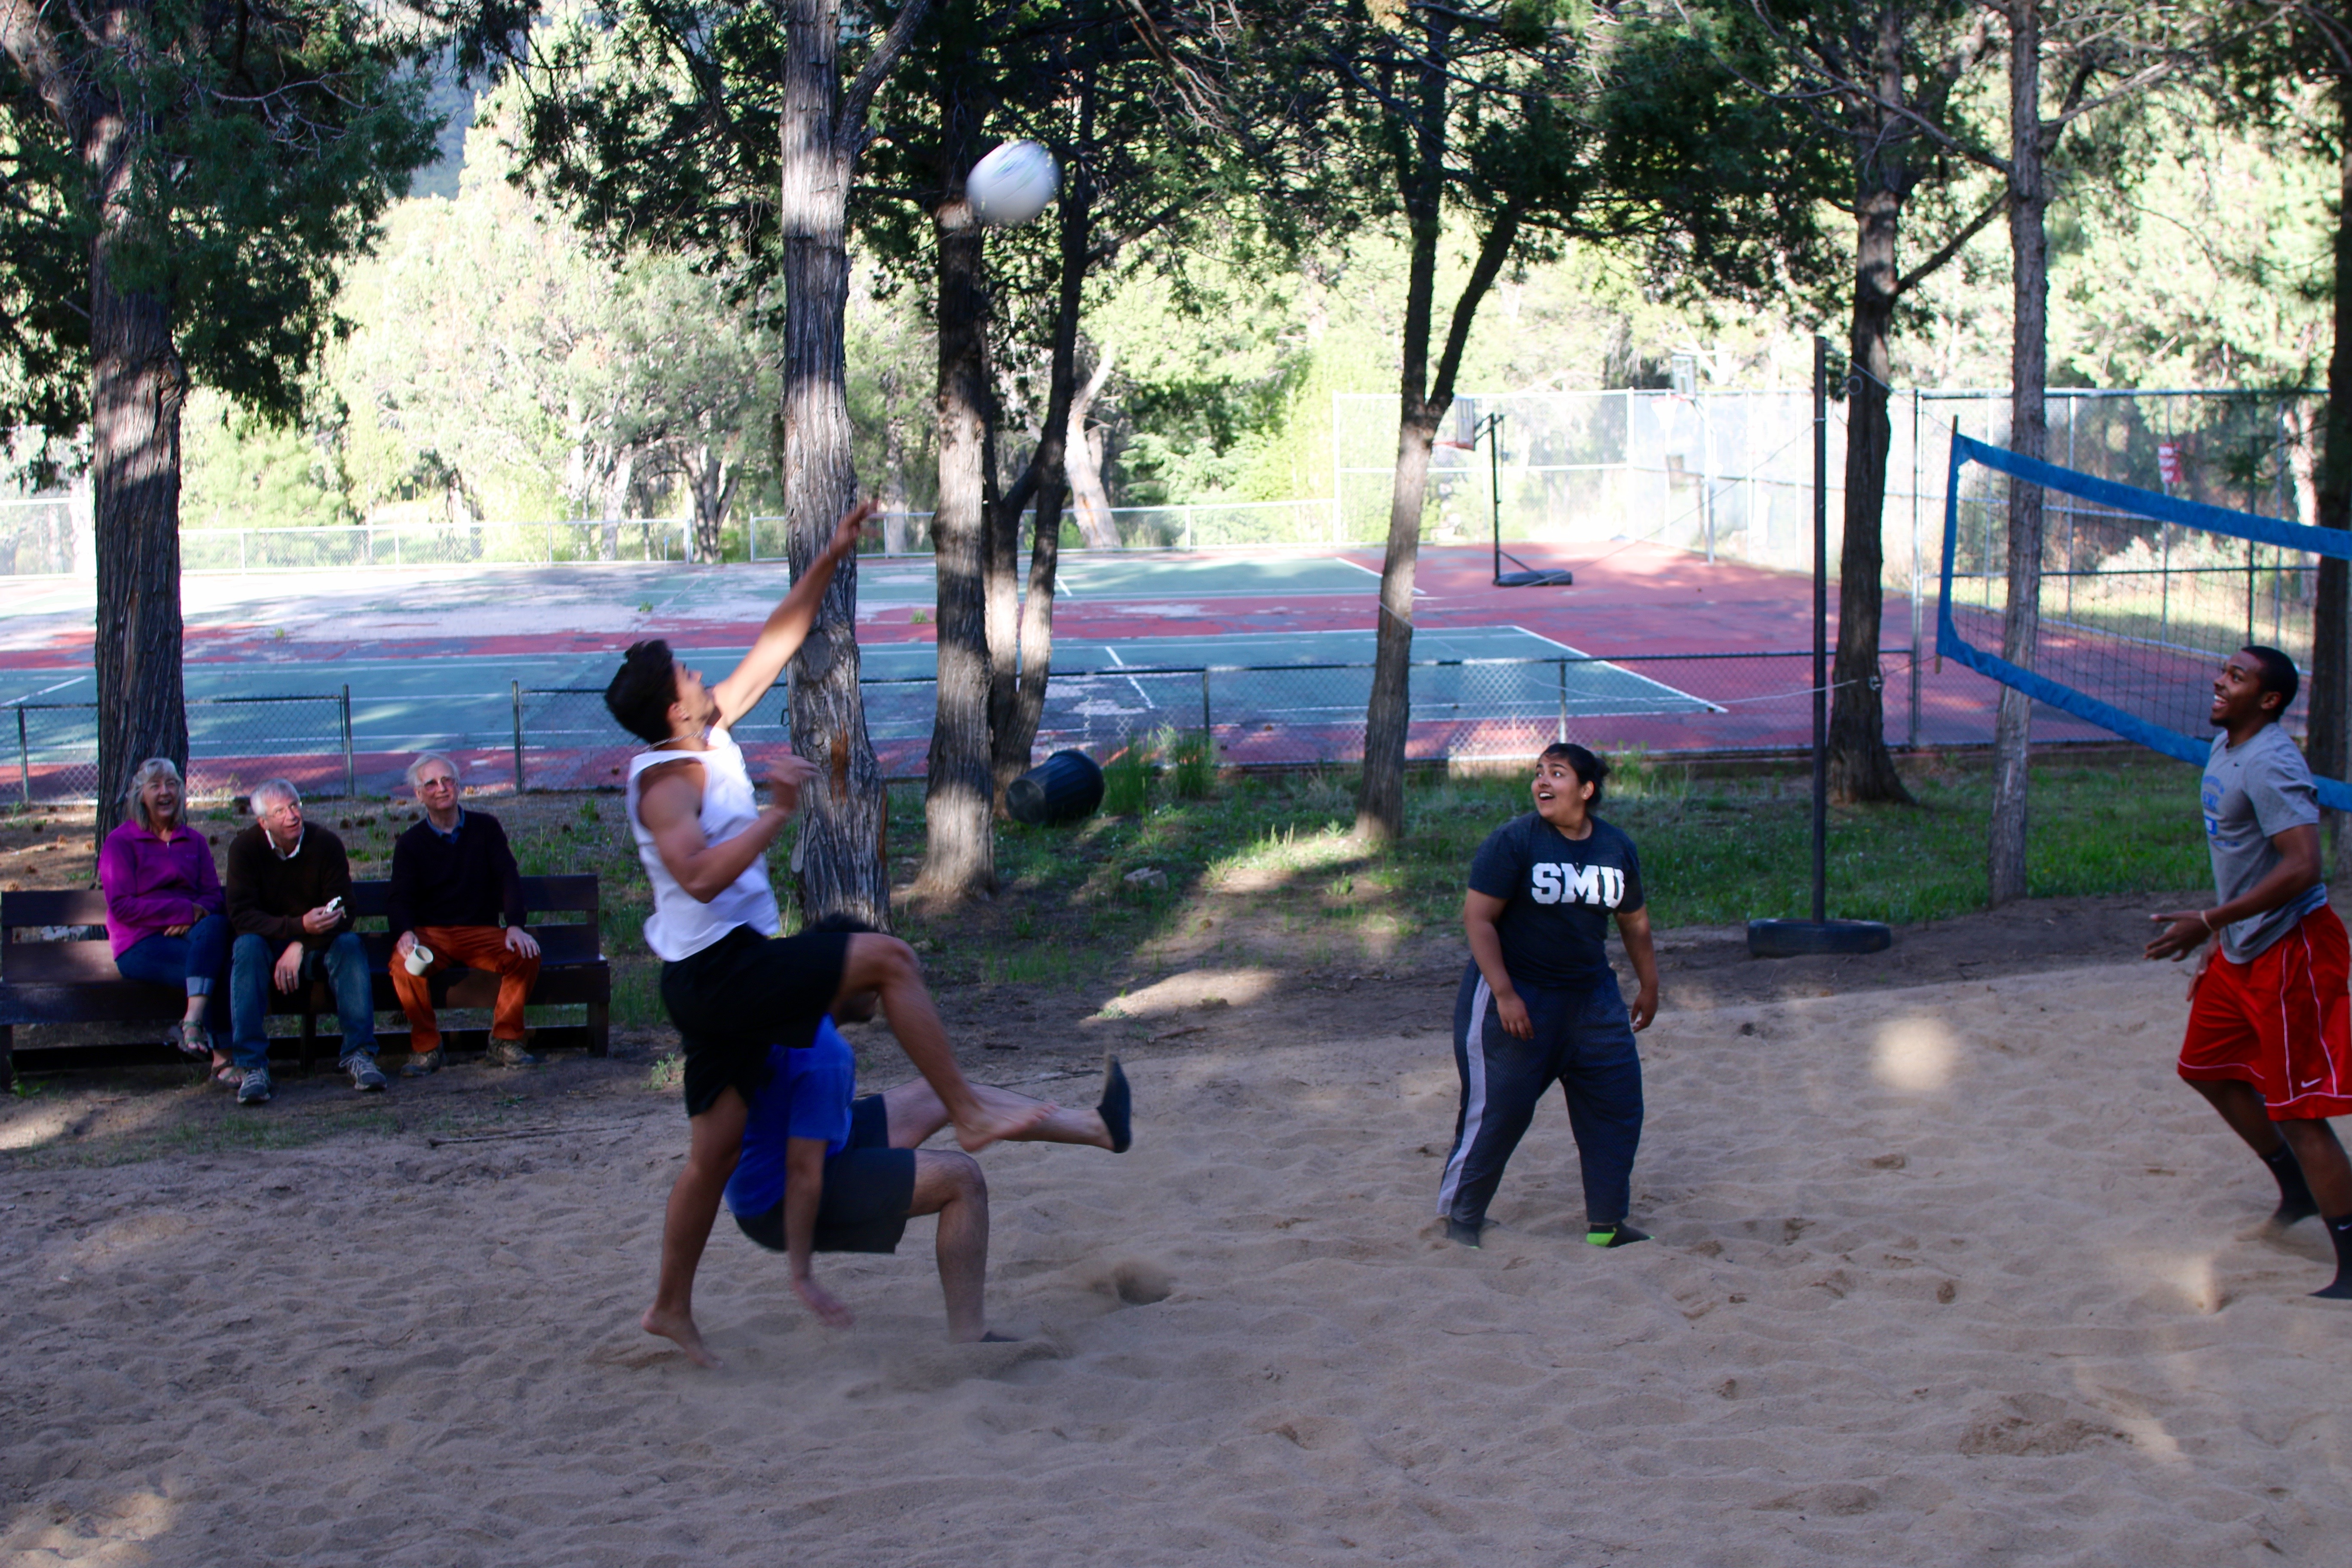 Students enjoy the volleyball court at SMU-in-Taos.